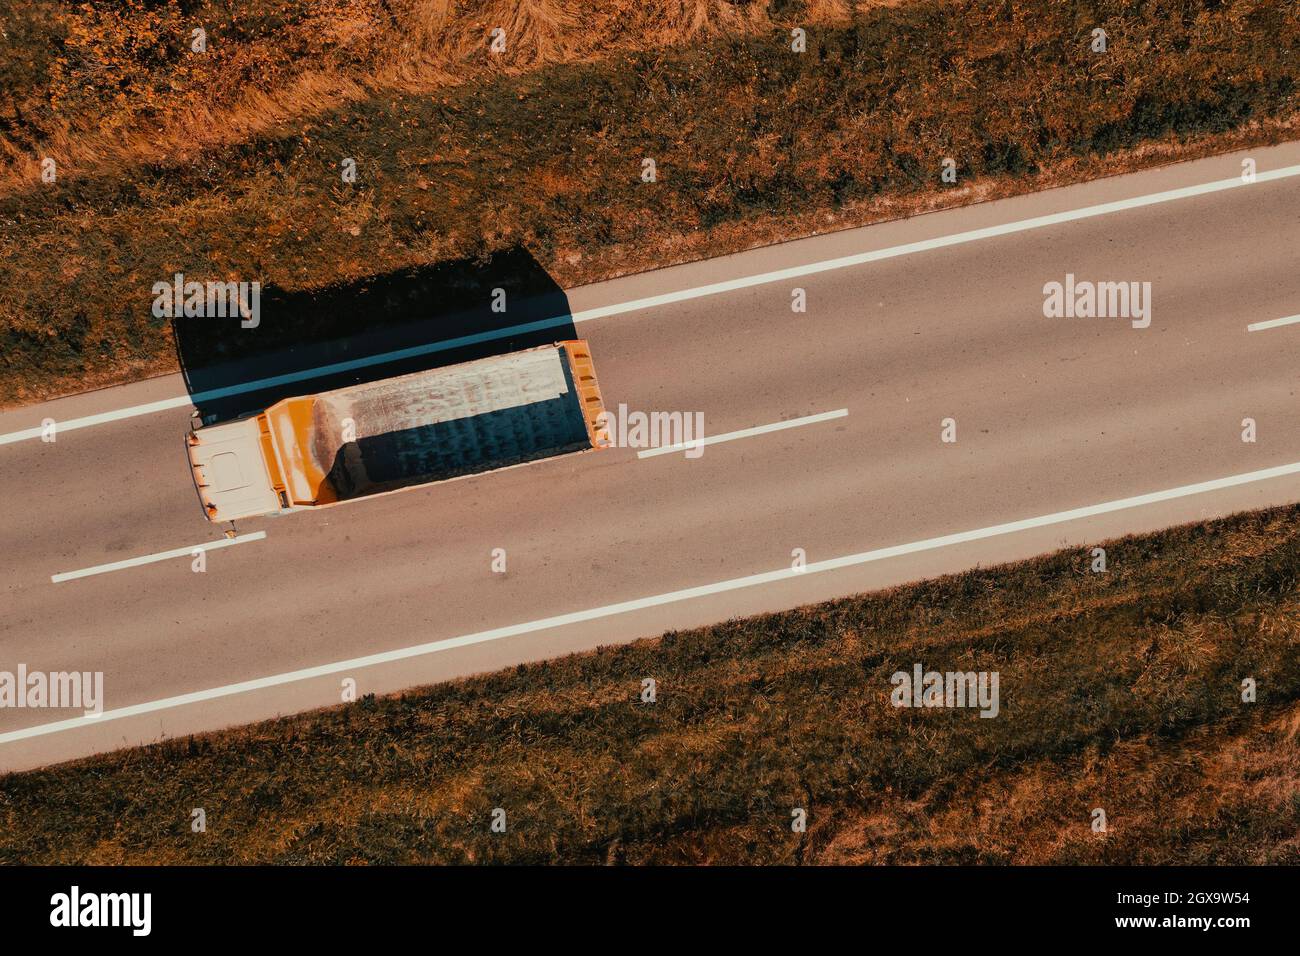 Aerial shot of truck with empty wagon on the road, large vehicle from drone pov Stock Photo